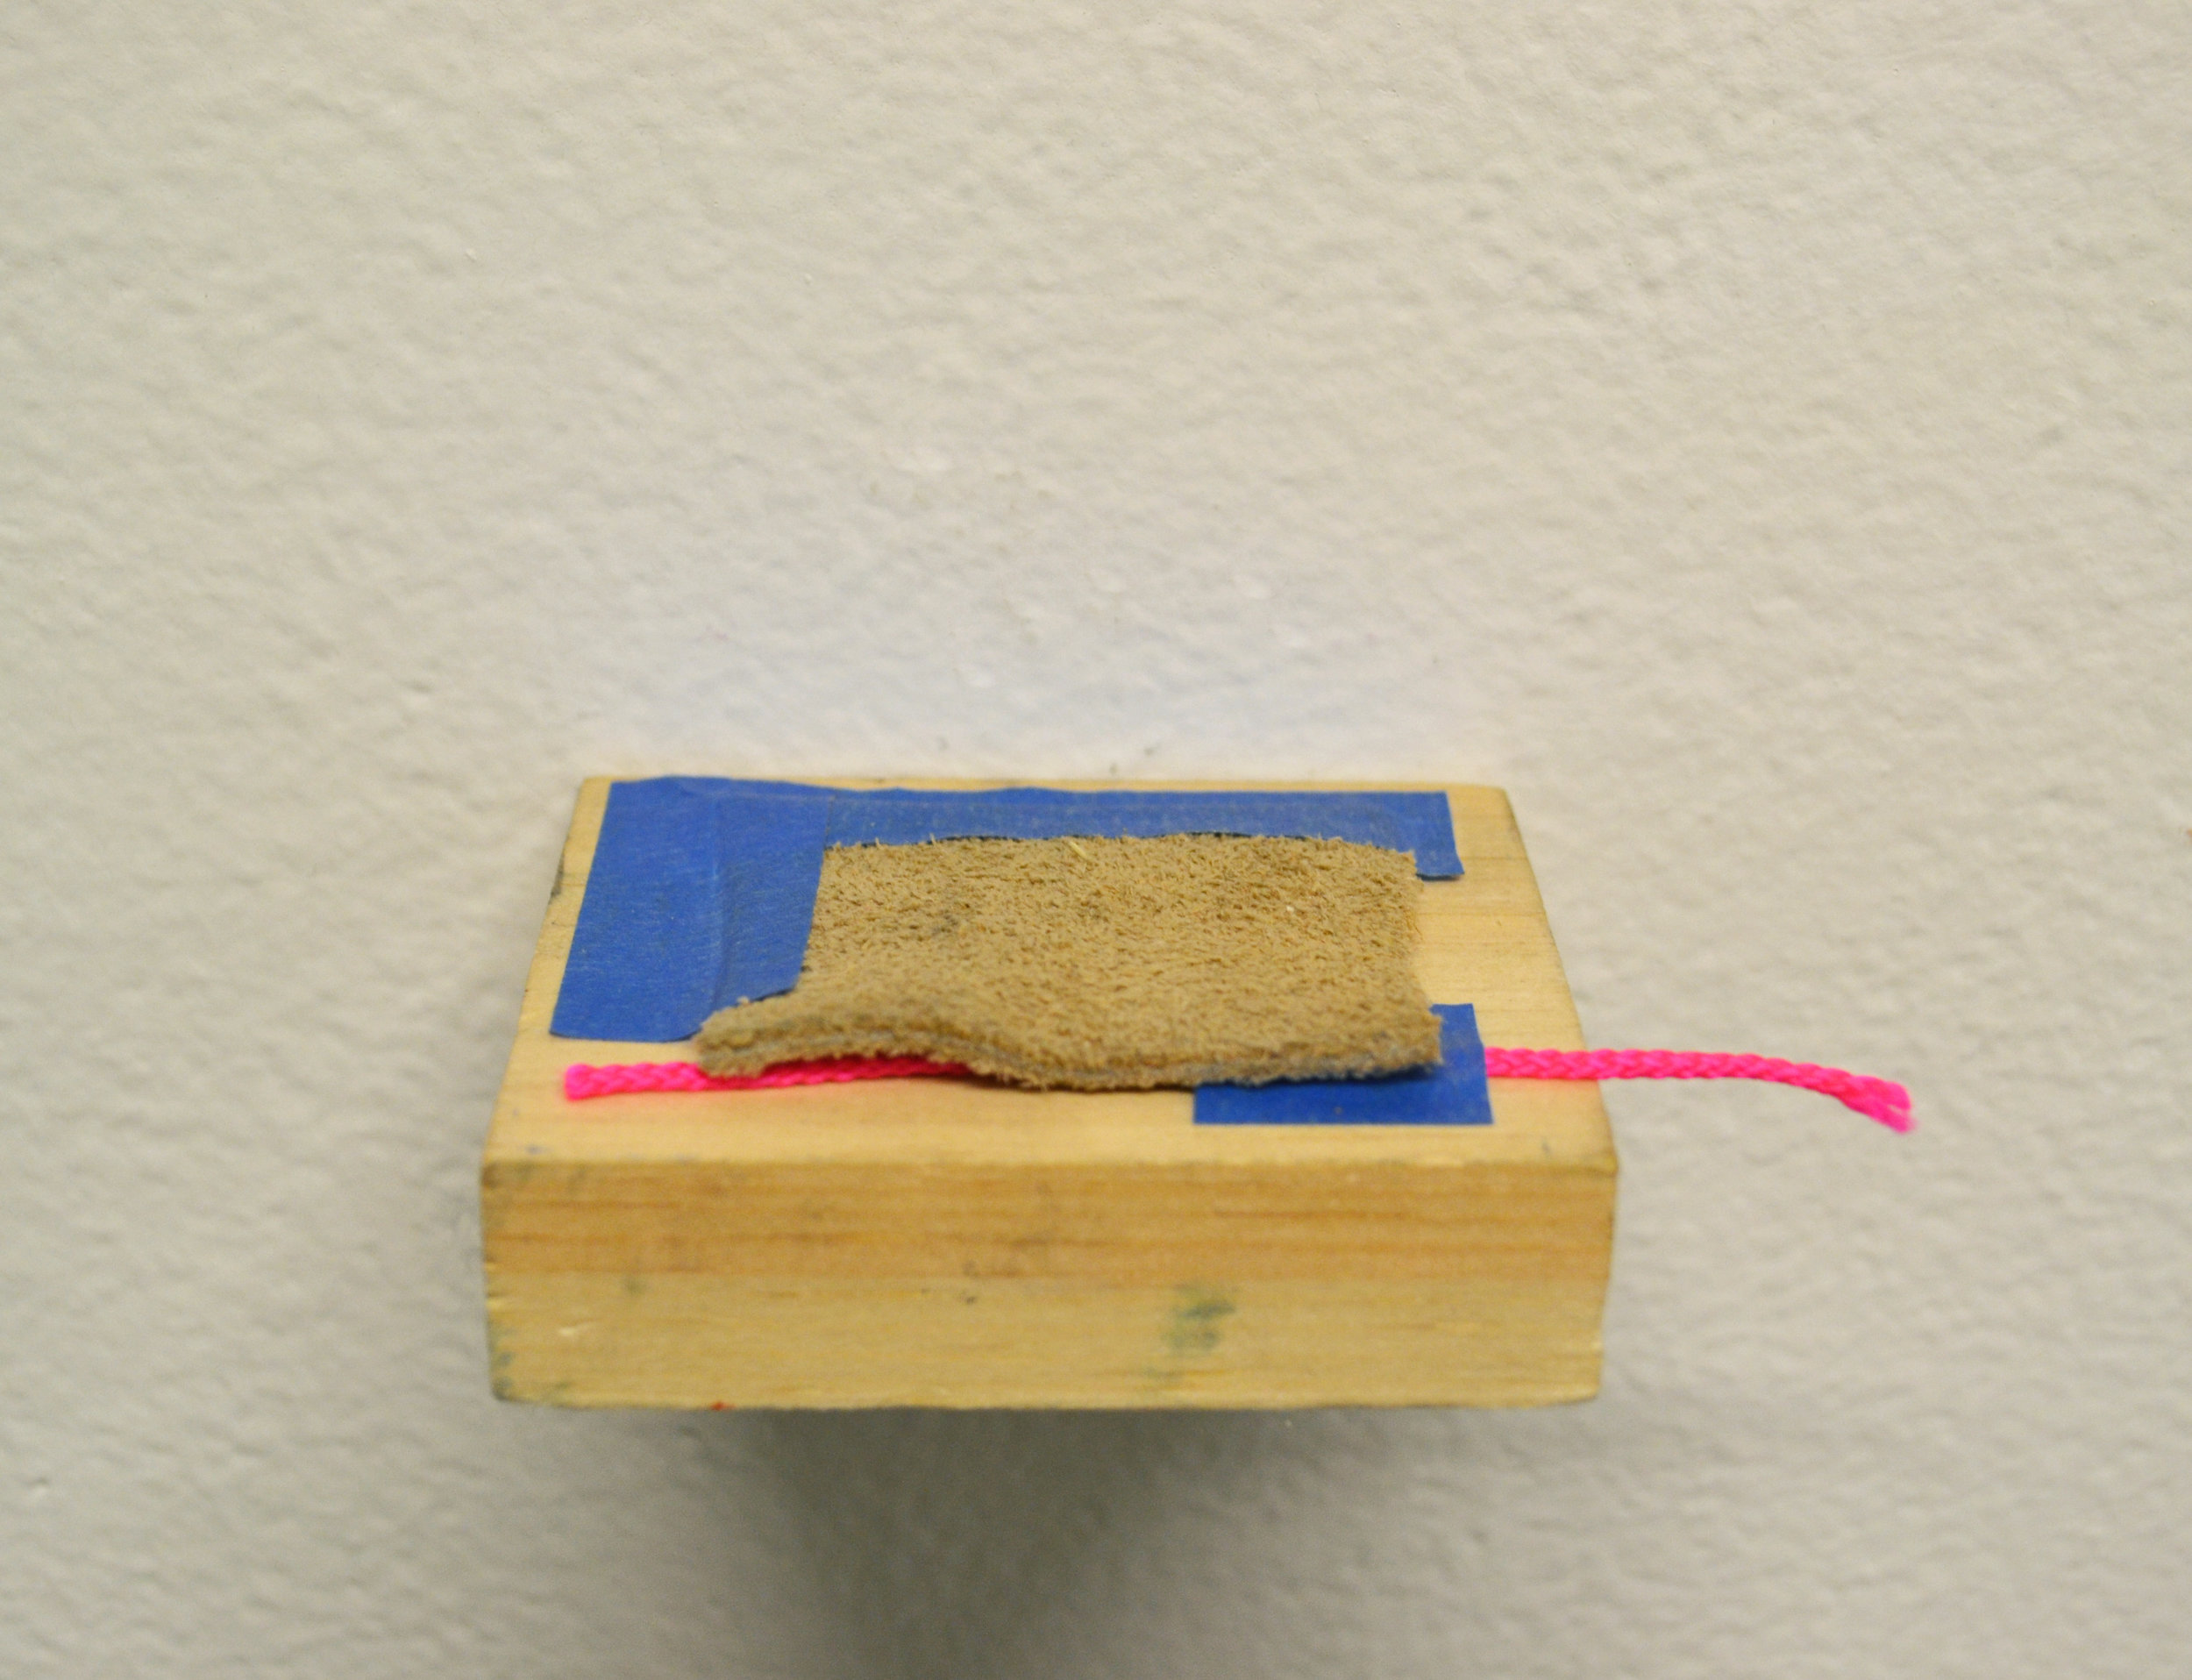  Painter's tape, suede, and plastic cord on wood 